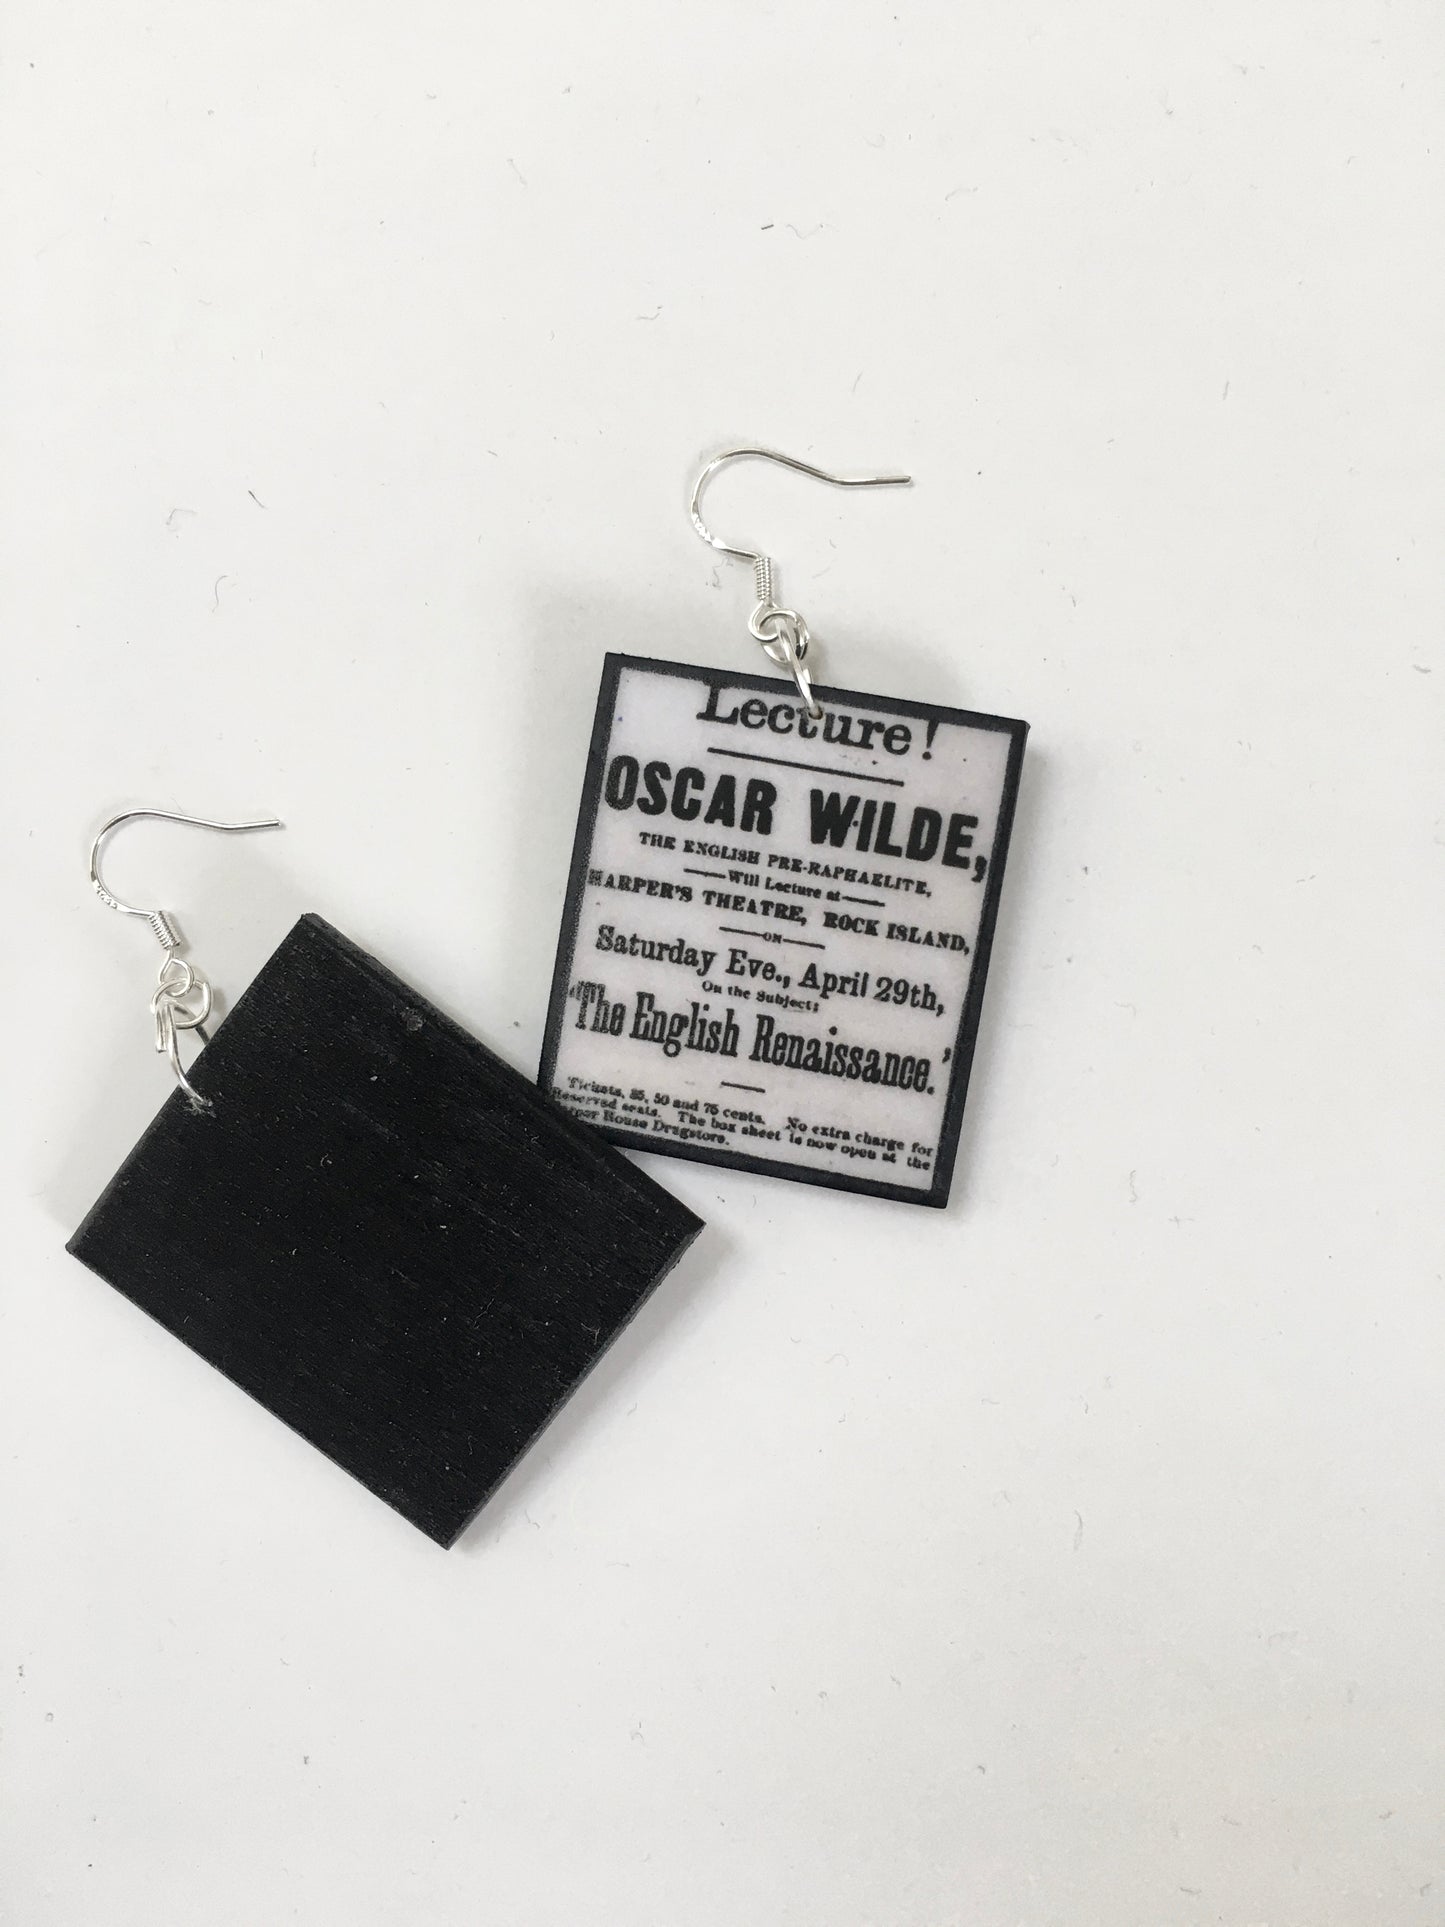 handmade art earrings with the page of newspaper with Lectures, Oscar Wilde at Harper's Theatre 29 April. sustainable artsy earrings by Obljewellery.